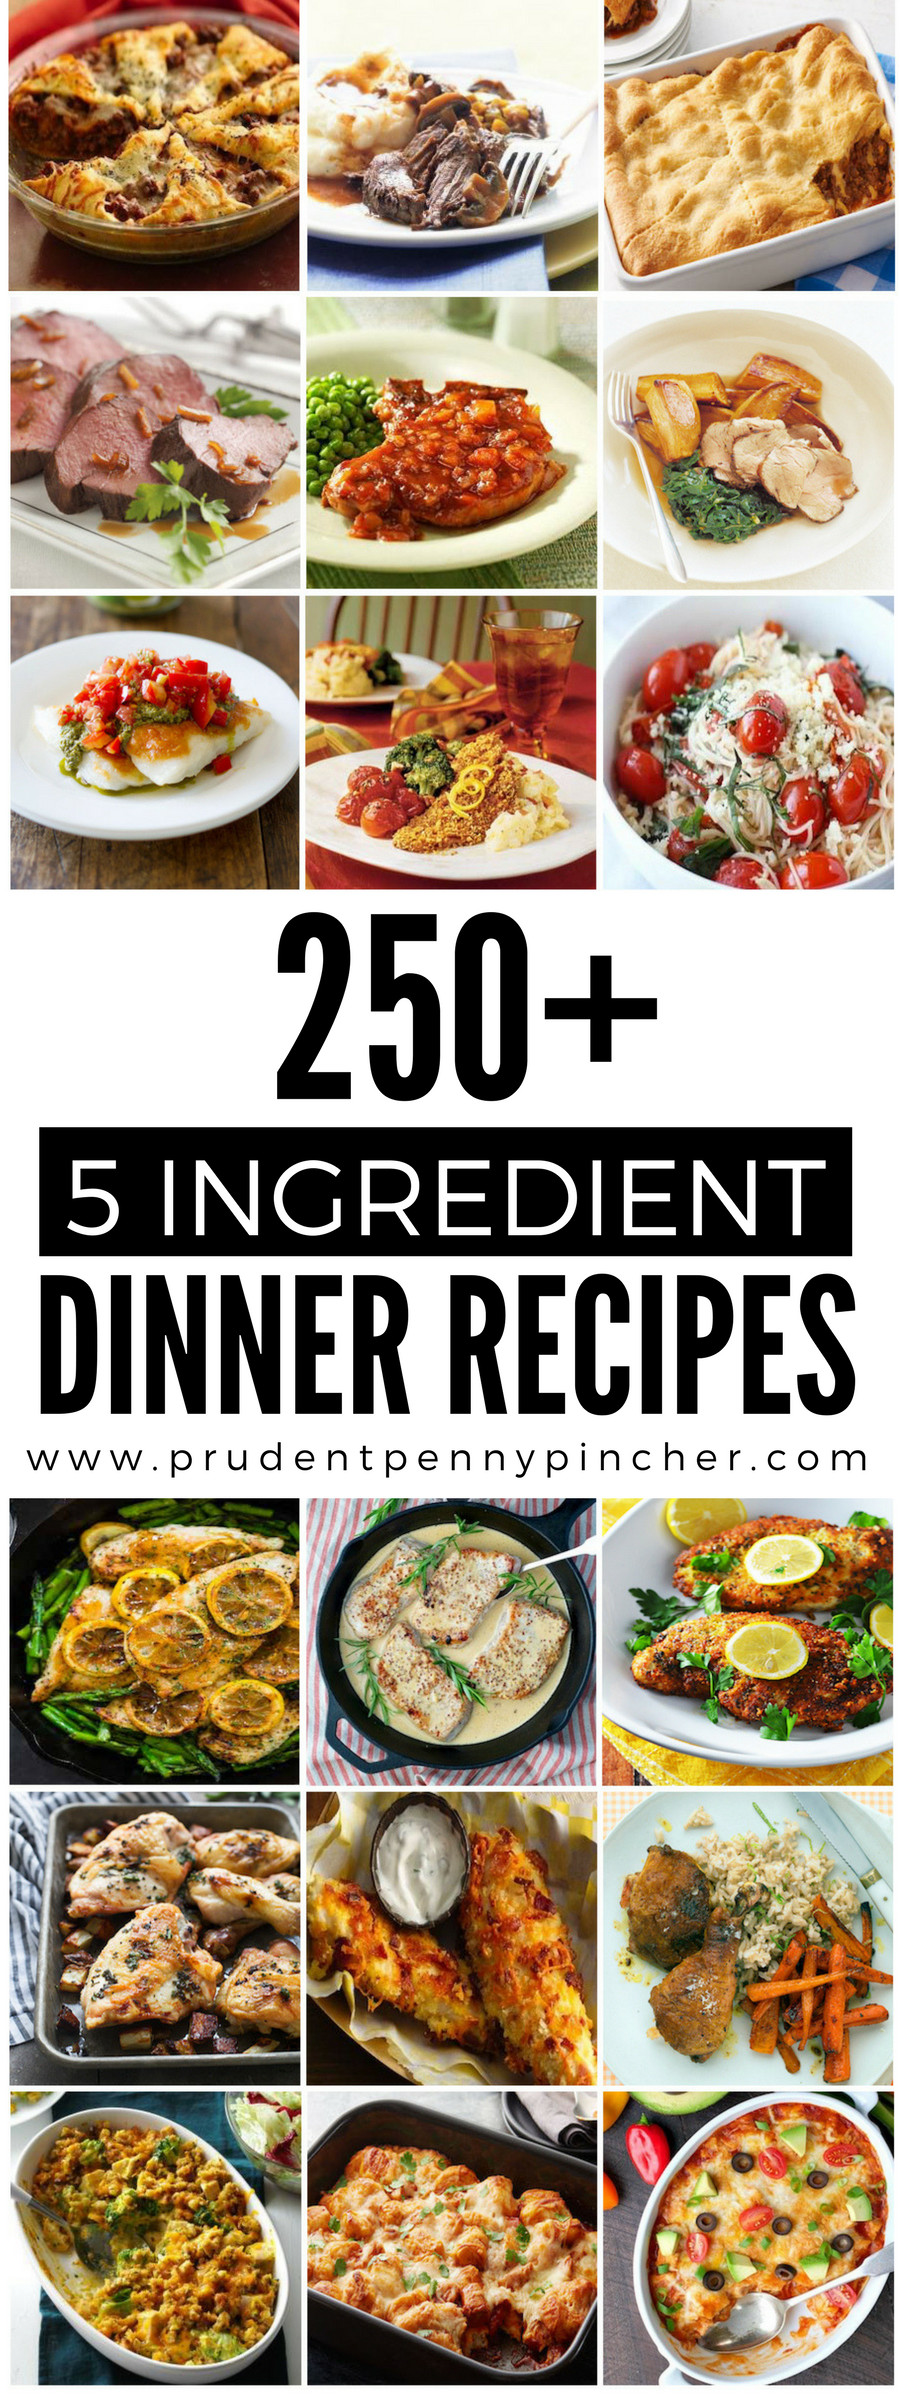 5 Ingredient Dinner Recipes
 250 5 Ingre nt Dinner Recipes Prudent Penny Pincher